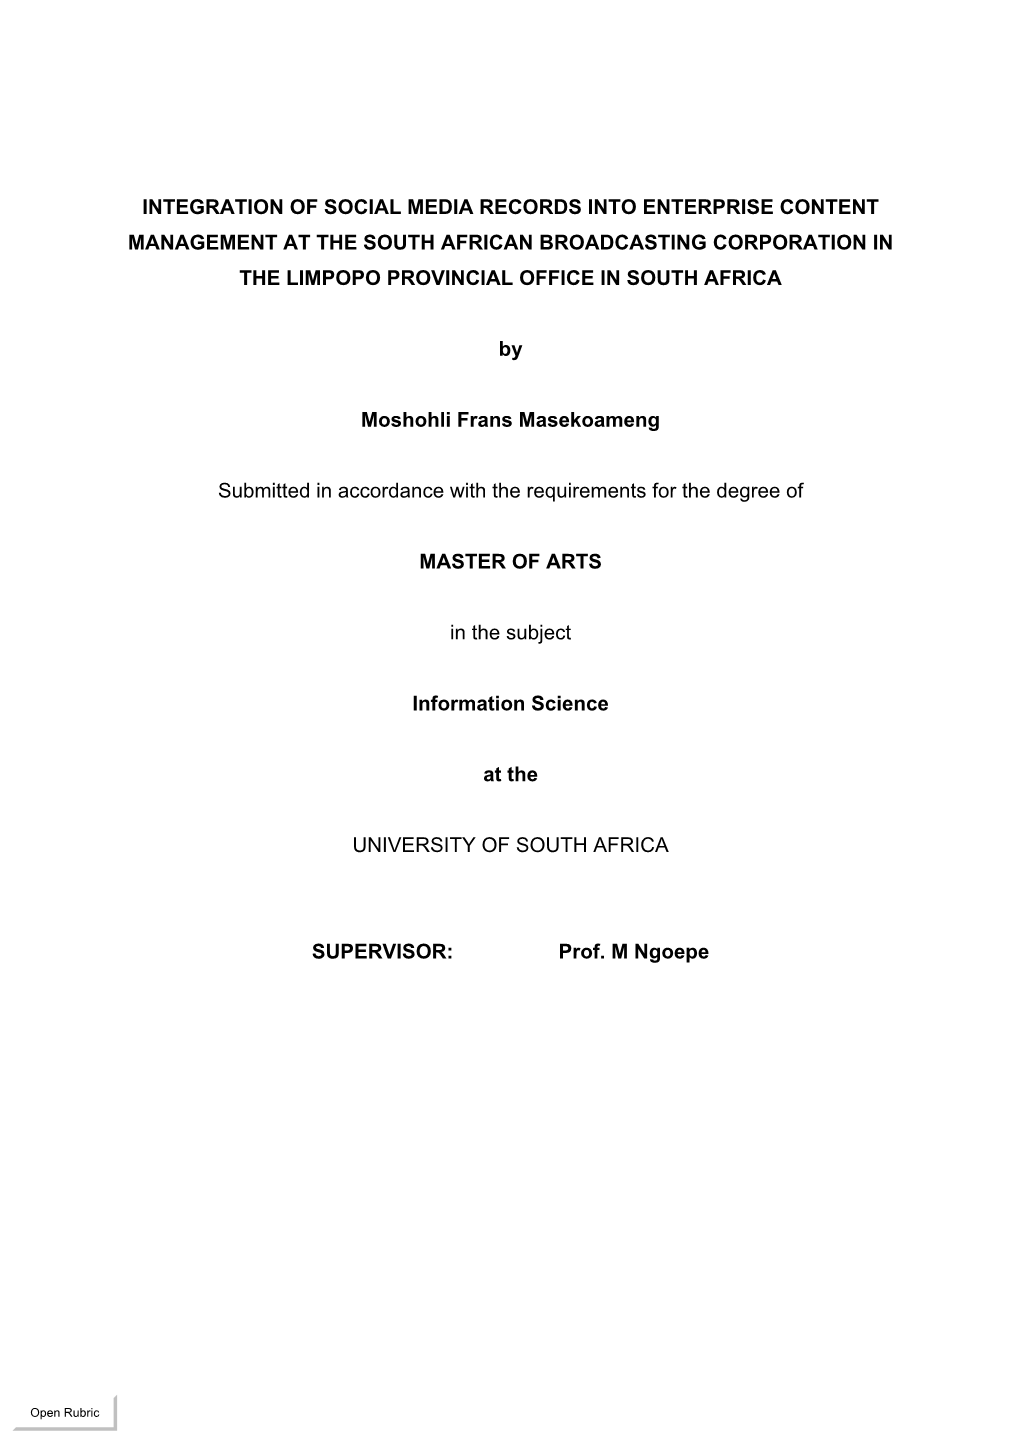 Integration of Social Media Records Into Enterprise Content Management at the South African Broadcasting Corporation in the Limpopo Provincial Office in South Africa